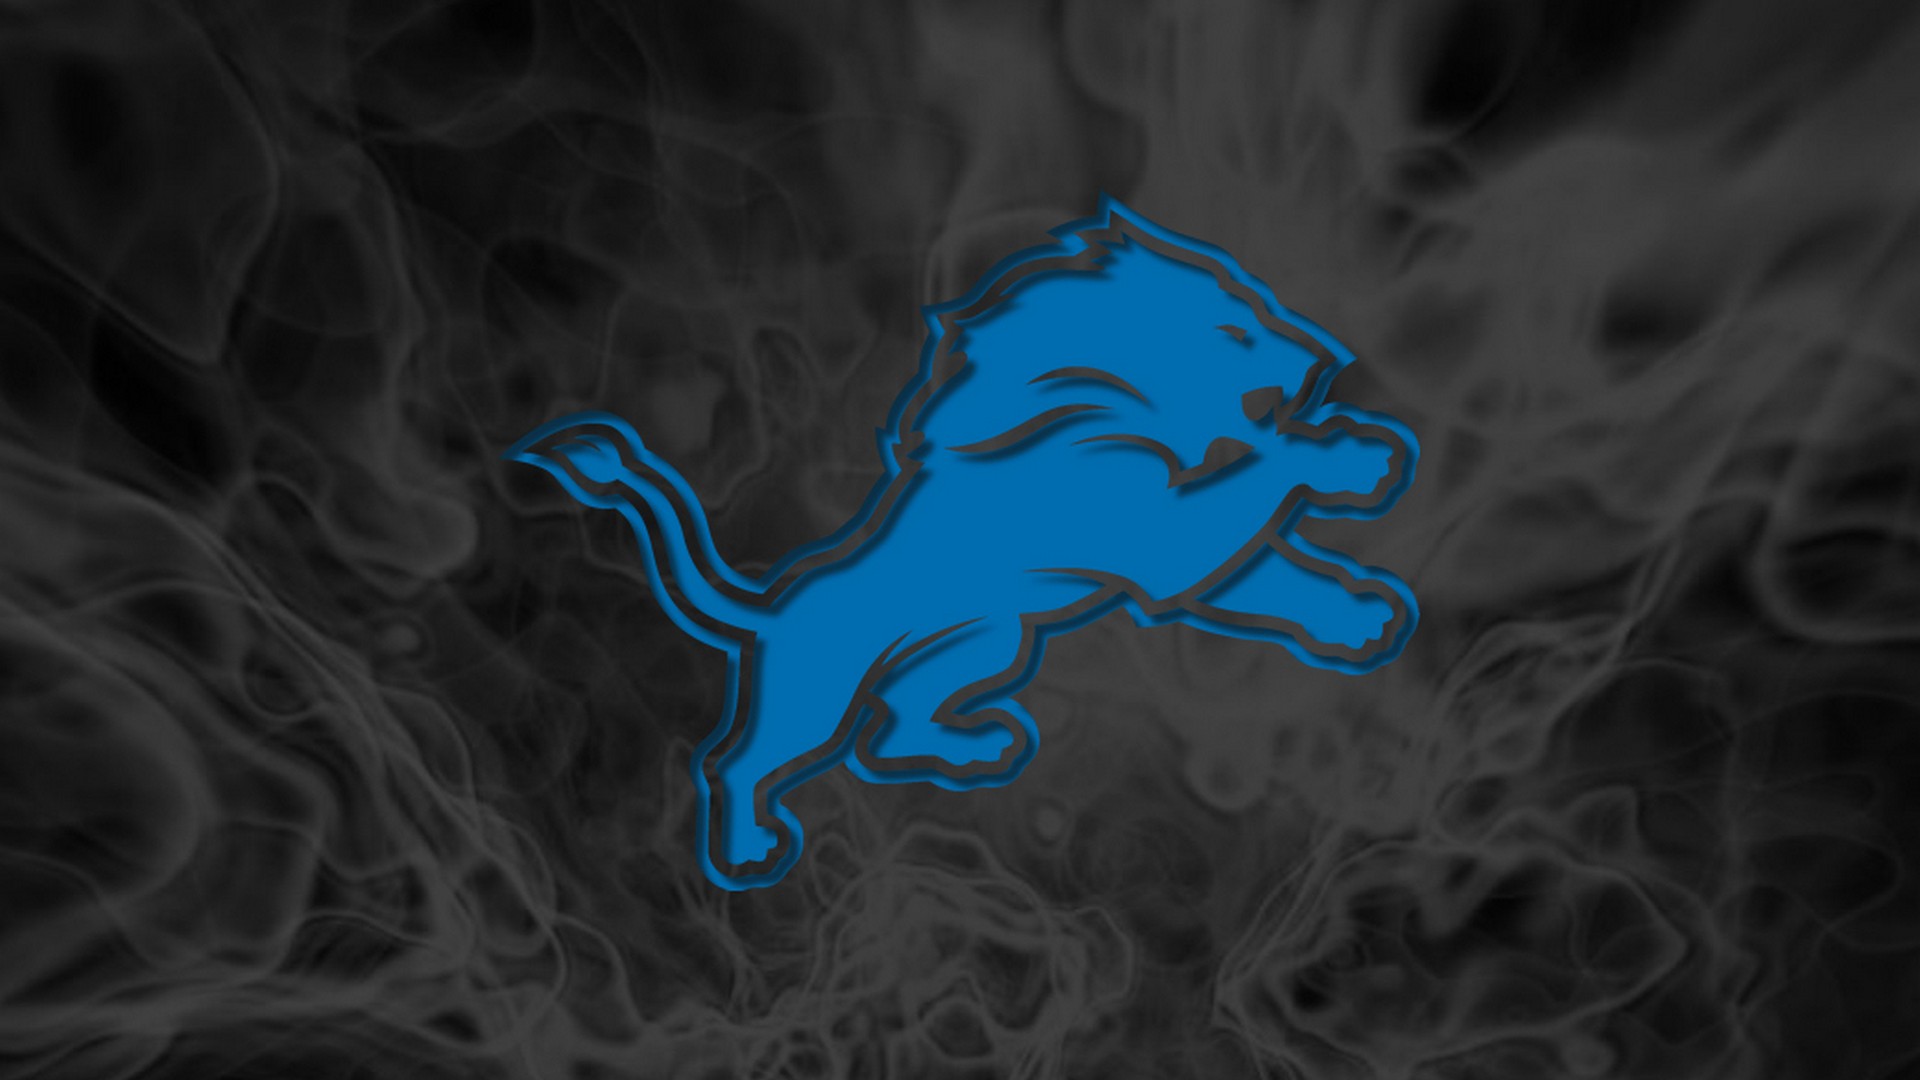 Wallpaper Desktop Detroit Lions NFL HD with high-resolution 1920x1080 pixel. You can use this wallpaper for your Mac or Windows Desktop Background, iPhone, Android or Tablet and another Smartphone device